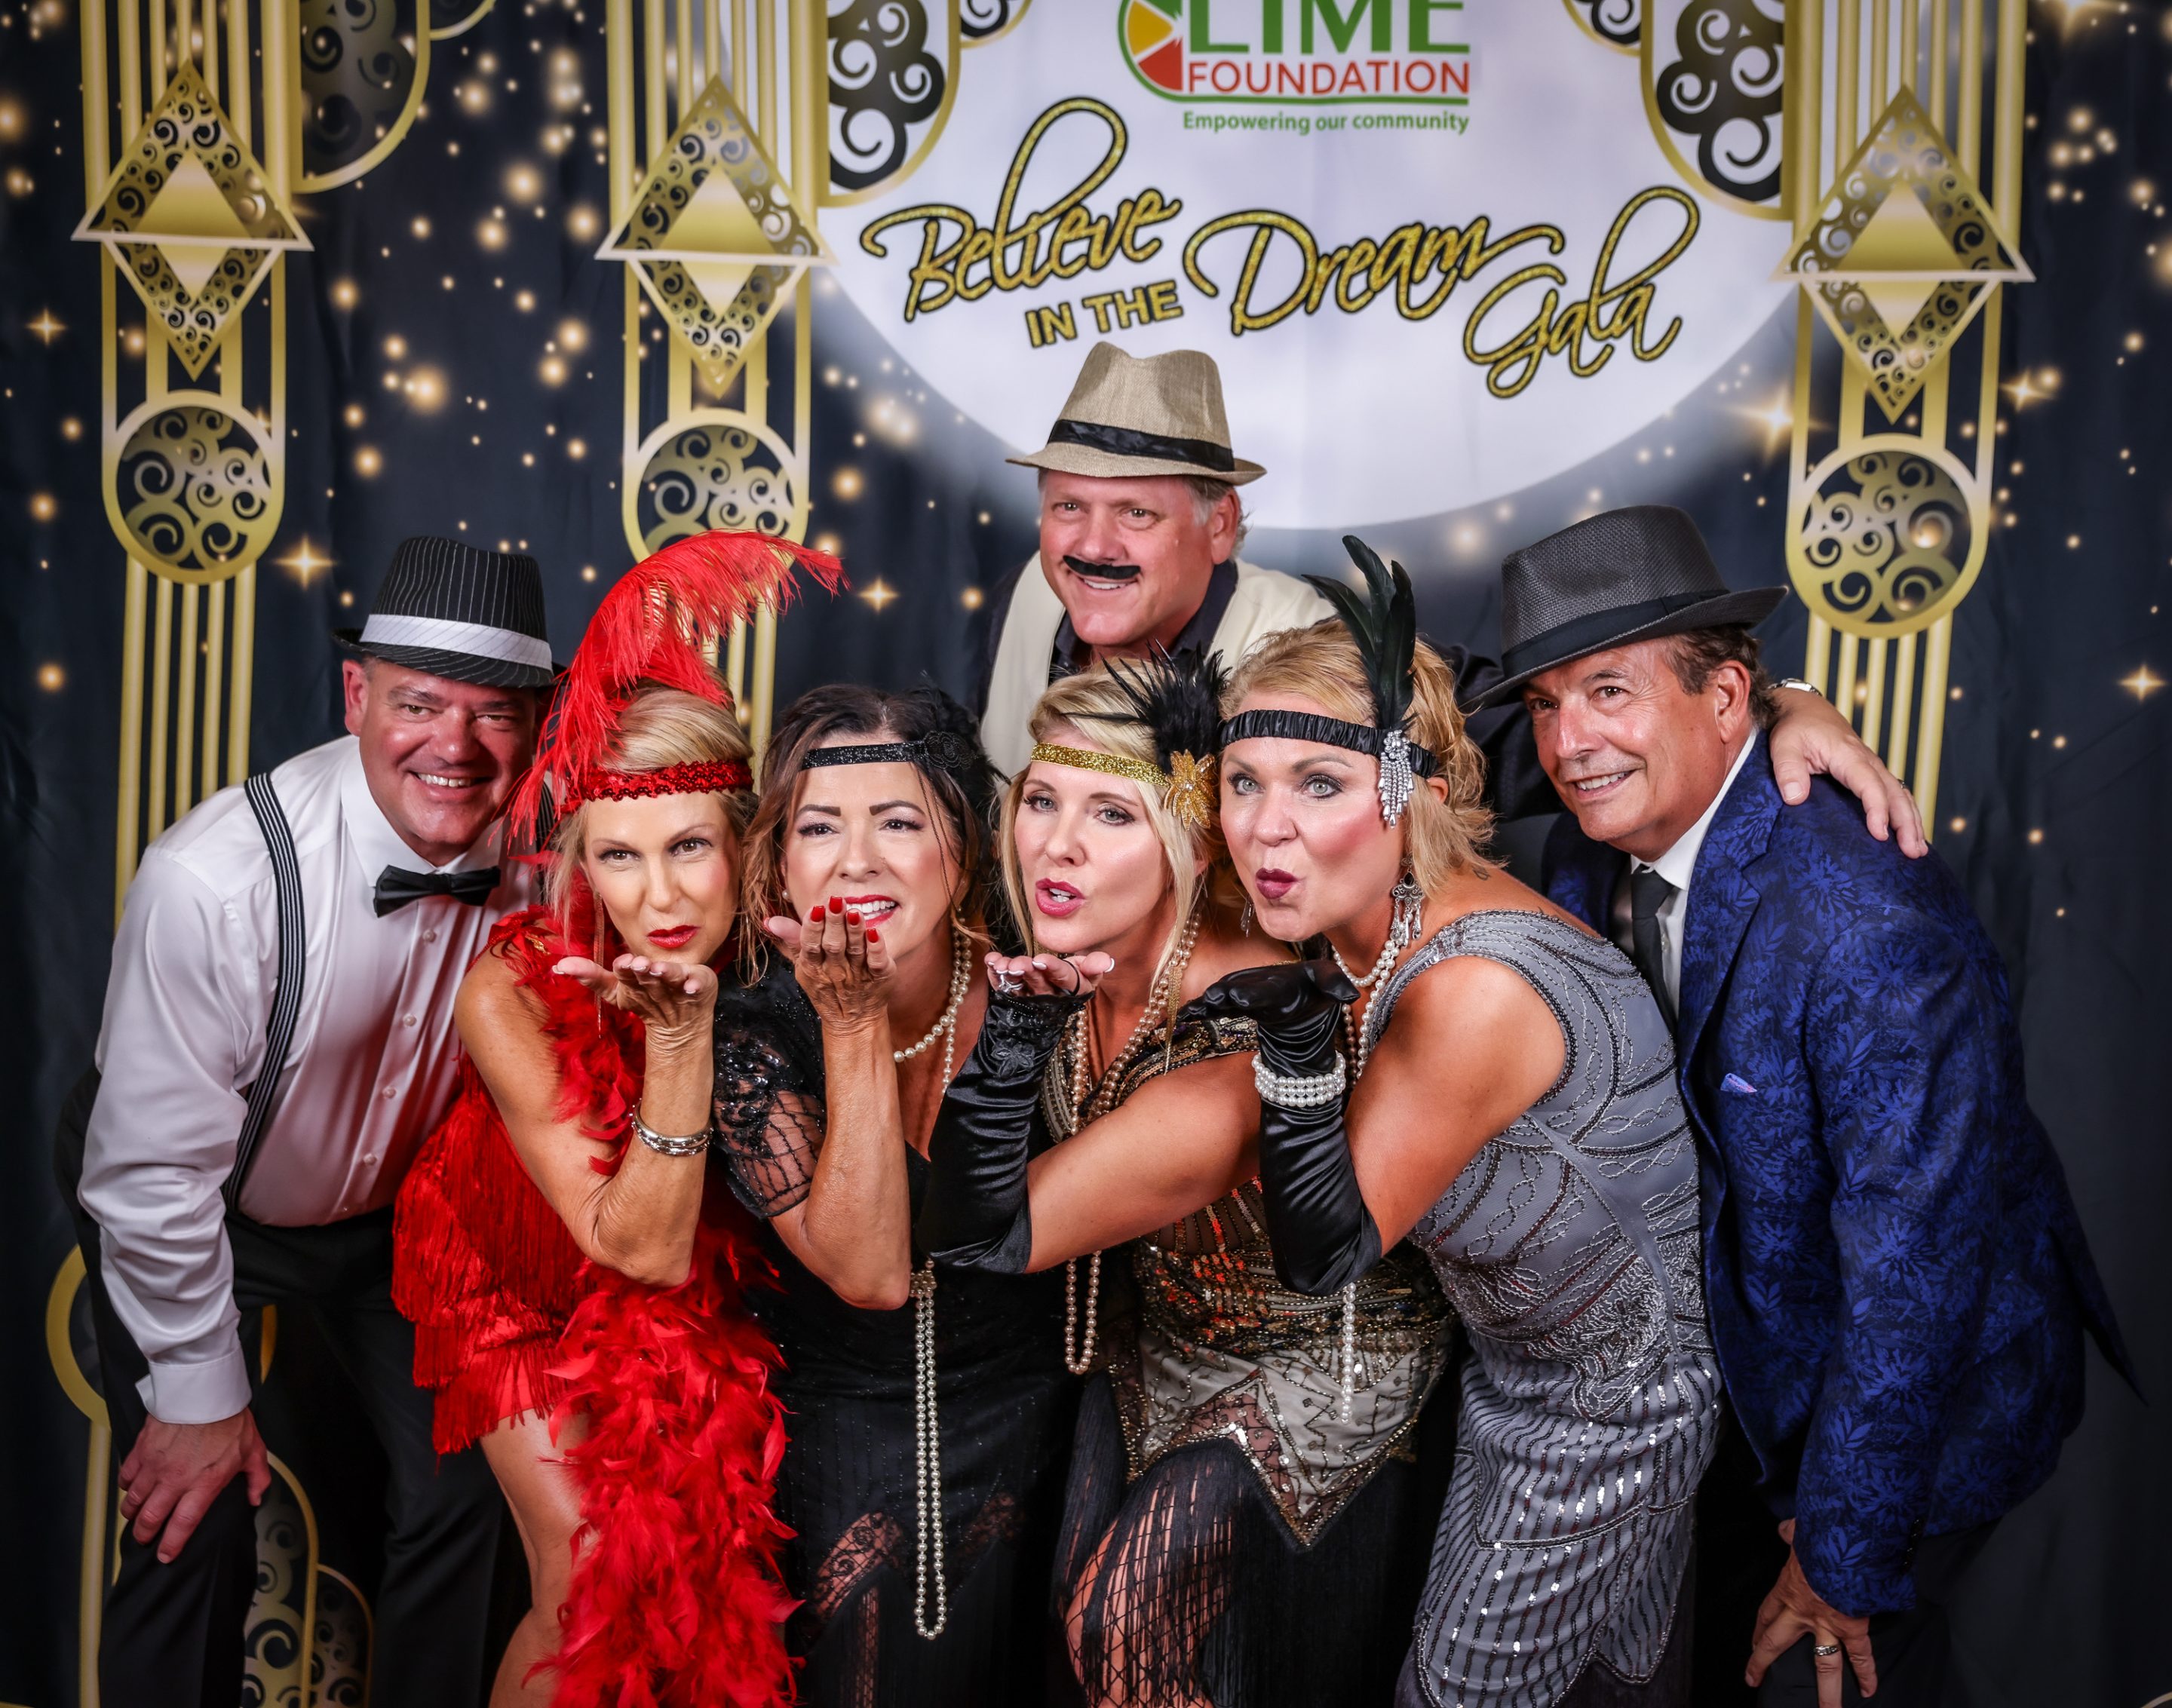 A group of people posing for a photo at a Gatsby-themed party hosted by The LIME Foundation of Santa Rosa.